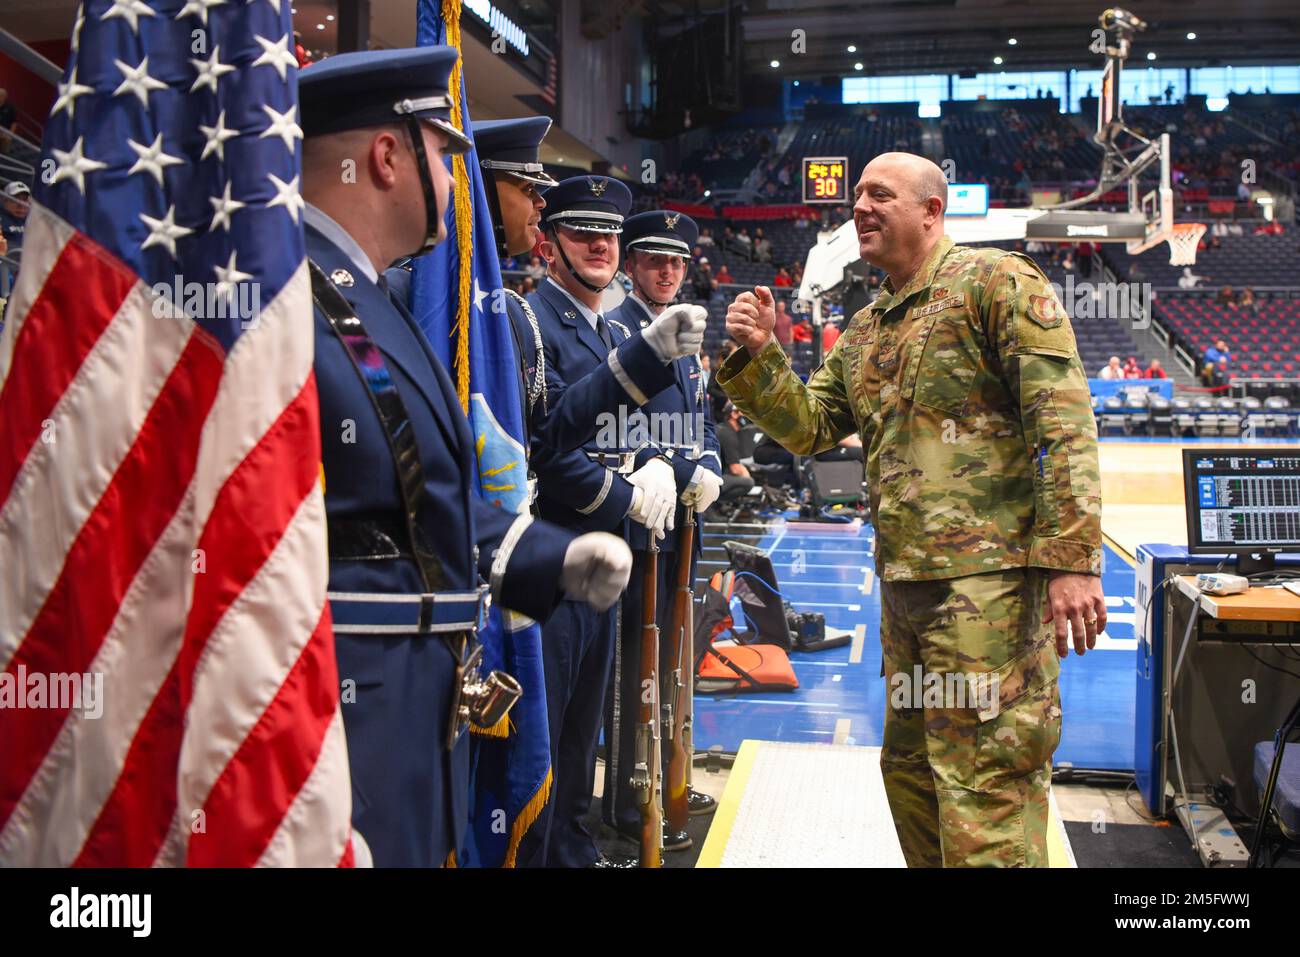 Col. Patrick Miller, 88th Air Base Wing commander, greets members of the Wright-Patterson Air Force Base Honor Guard before the start of the NCAA men’s basketball tournament March 15, 2022, at the University of Dayton Arena. The Honor Guard performed in the opening ceremony. Stock Photo